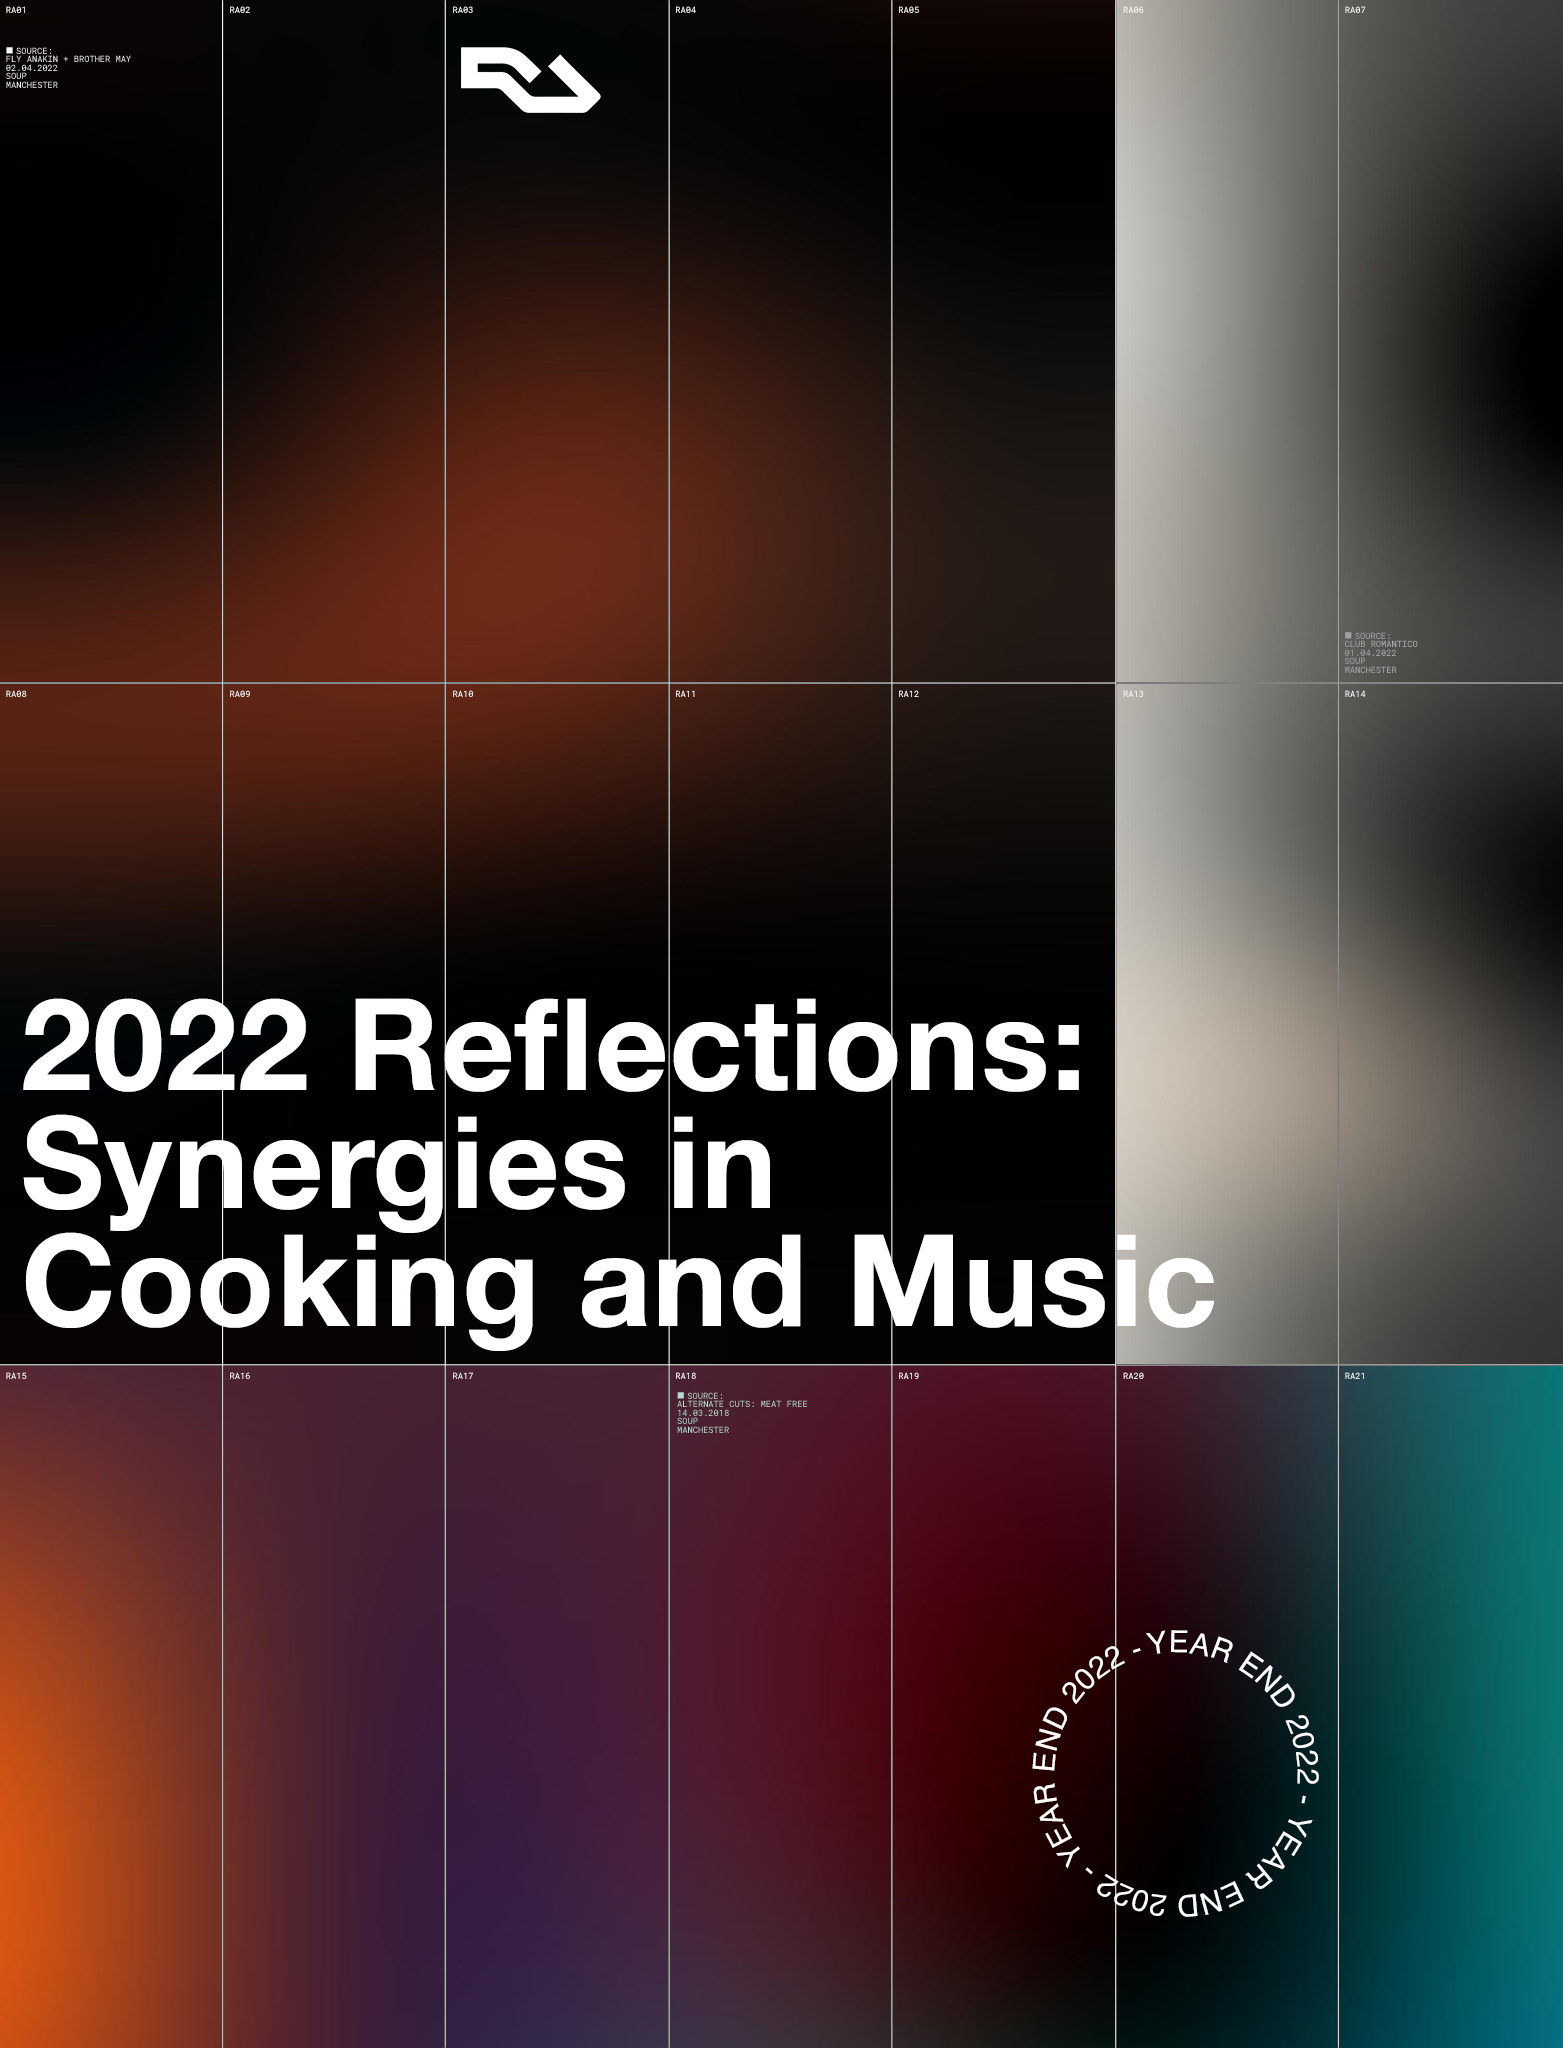 2022 Reflections: Synergies in Cooking and Music